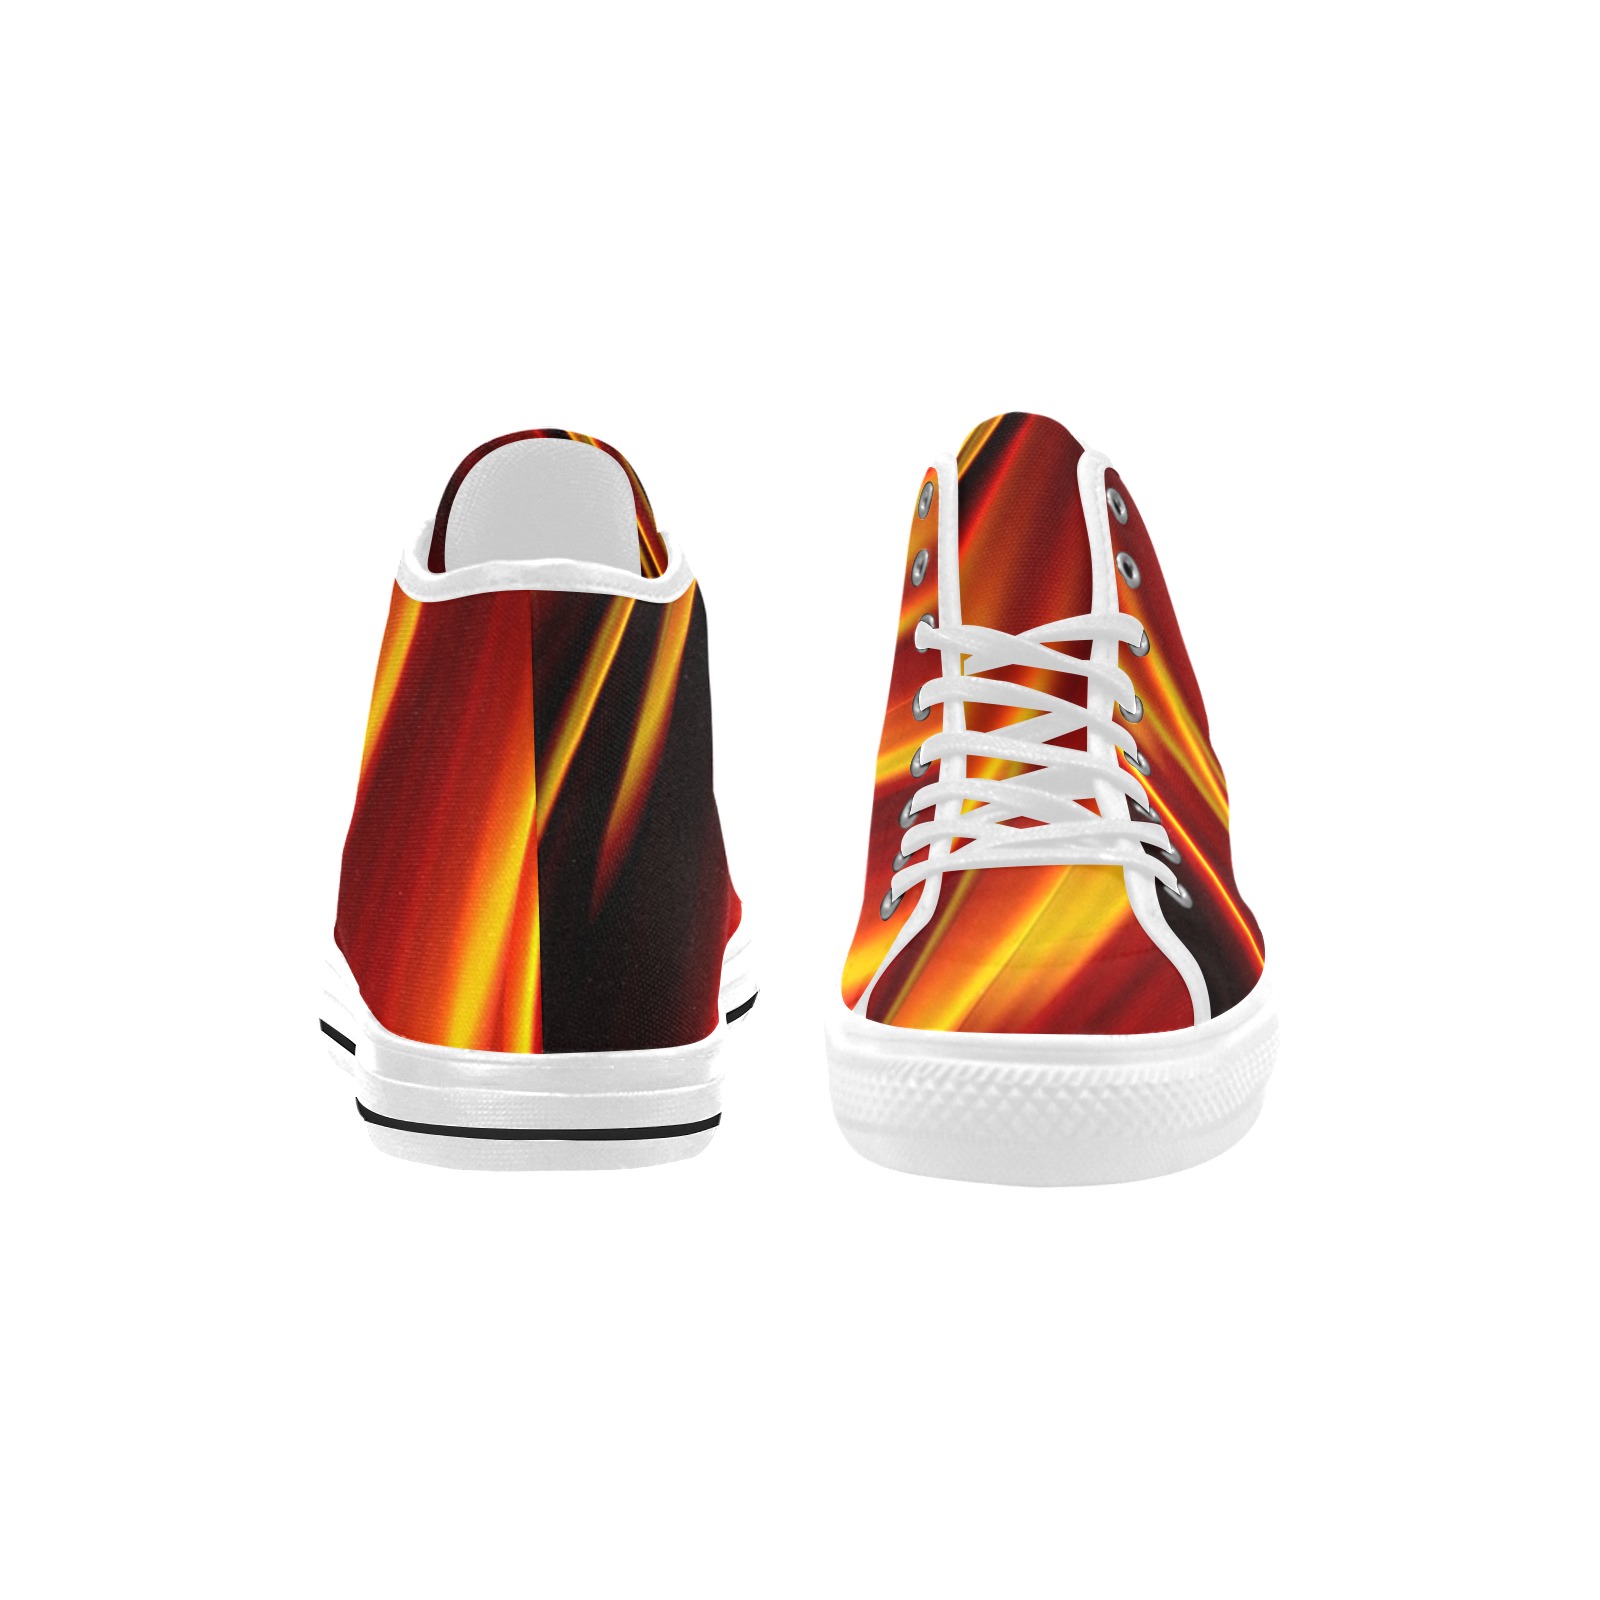 Orange and Red Flames Fractal Abstract Vancouver H Women's Canvas Shoes (1013-1)